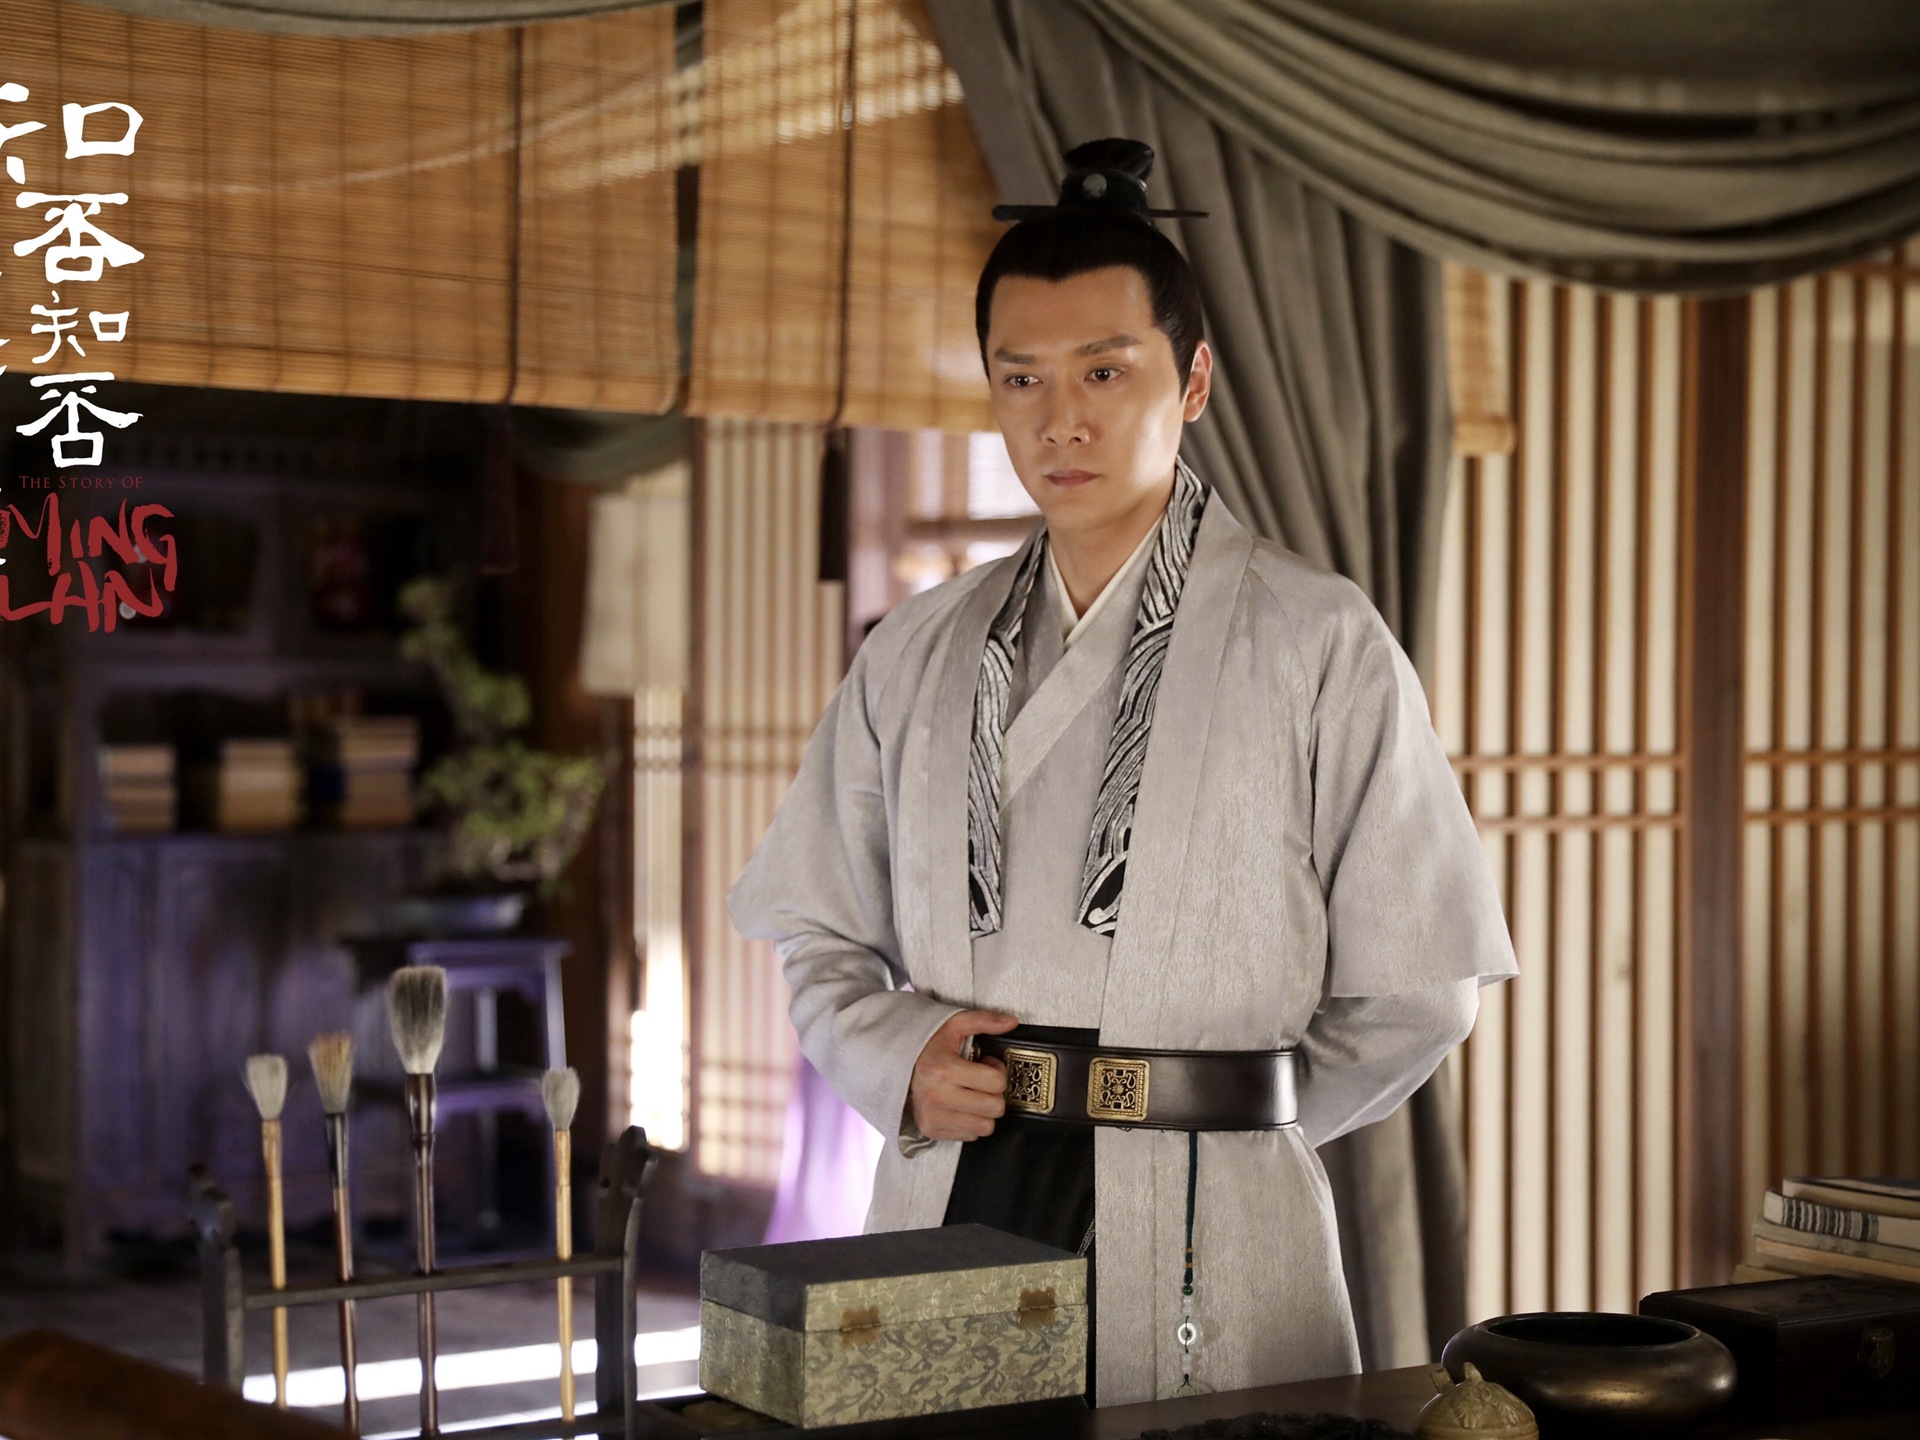 The Story Of MingLan, TV series HD wallpapers #49 - 1920x1440